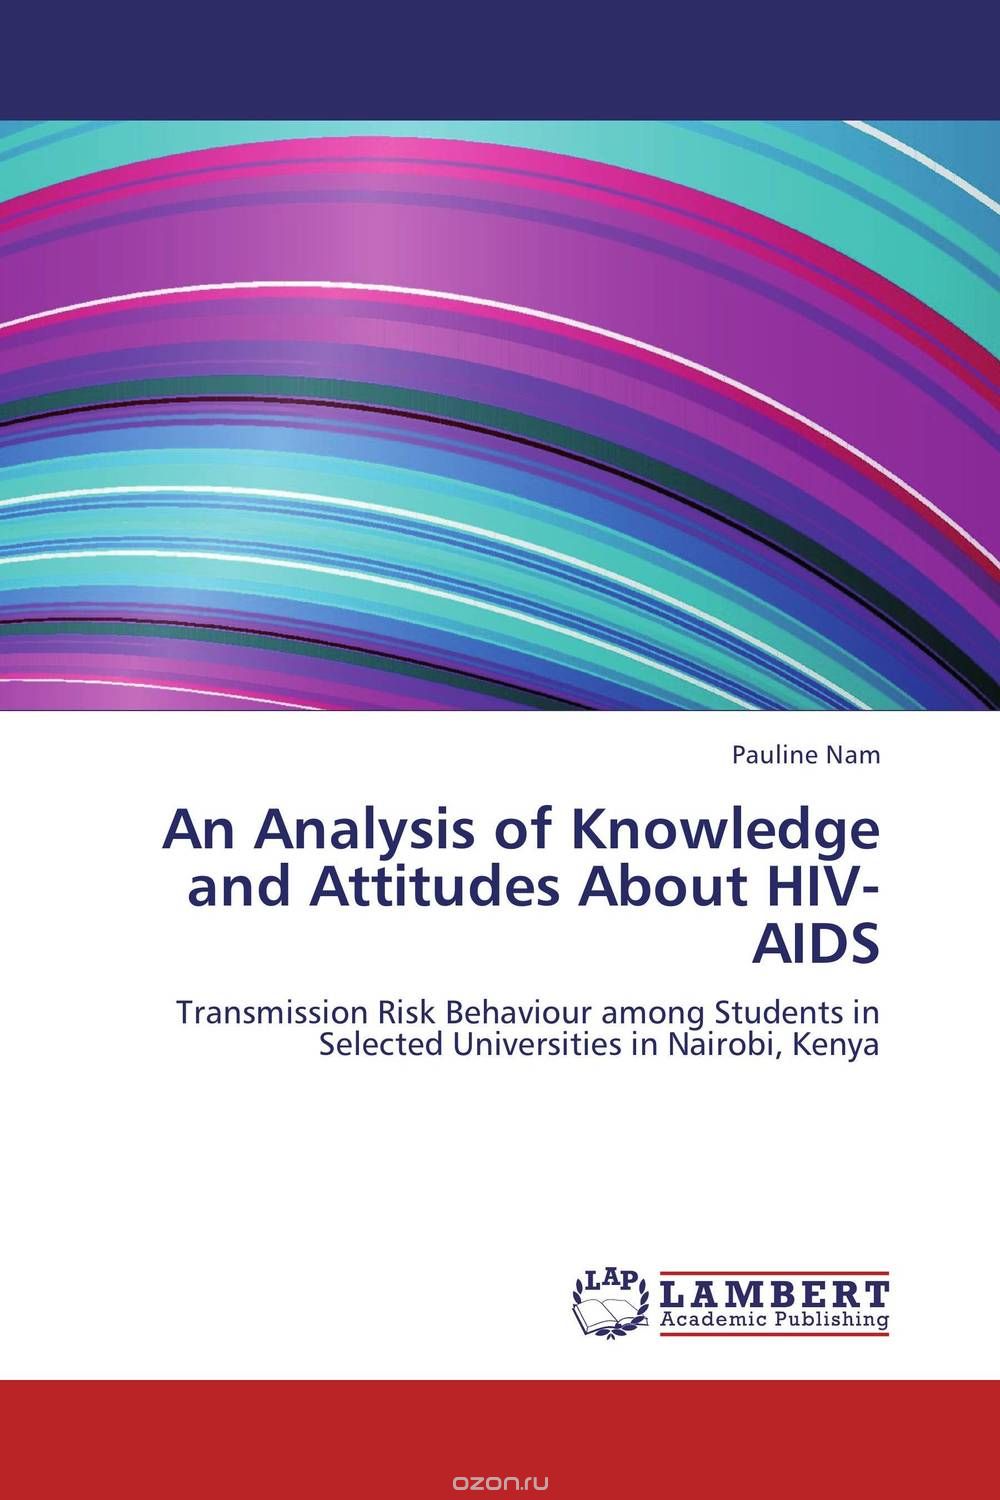 An Analysis of Knowledge and Attitudes About HIV-AIDS